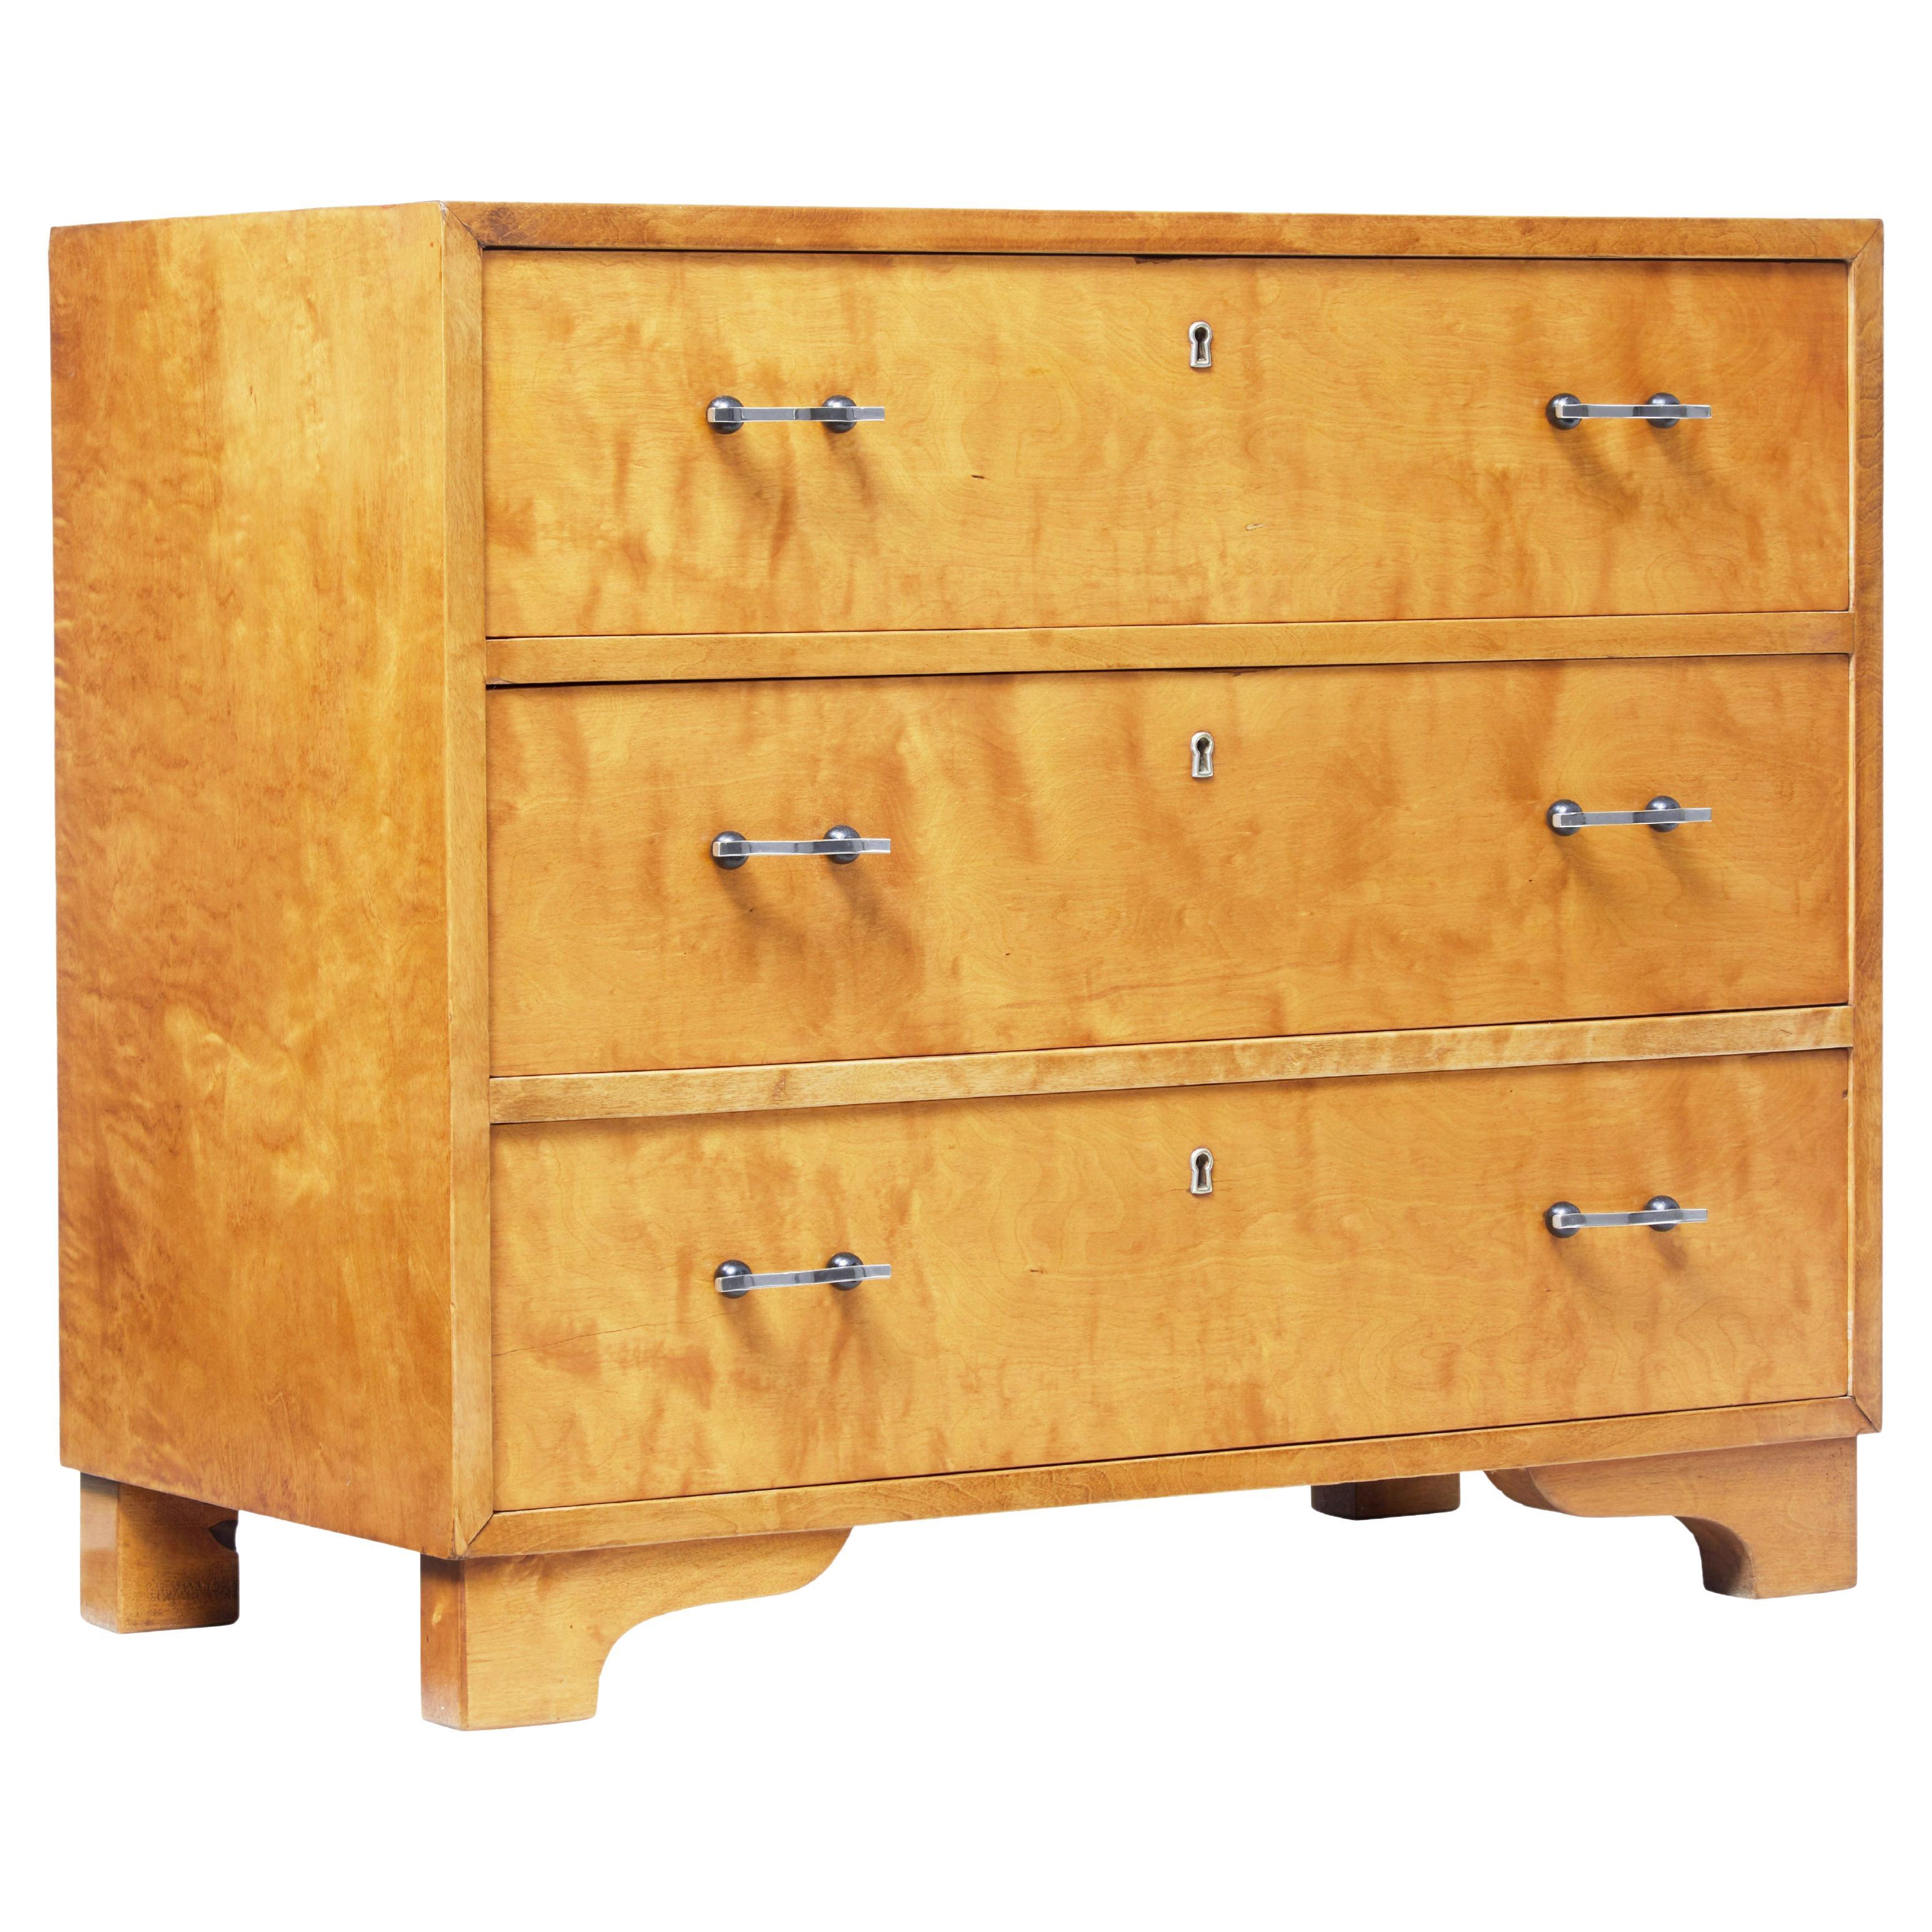 Mid 20th century Swedish birch chest of drawers For Sale